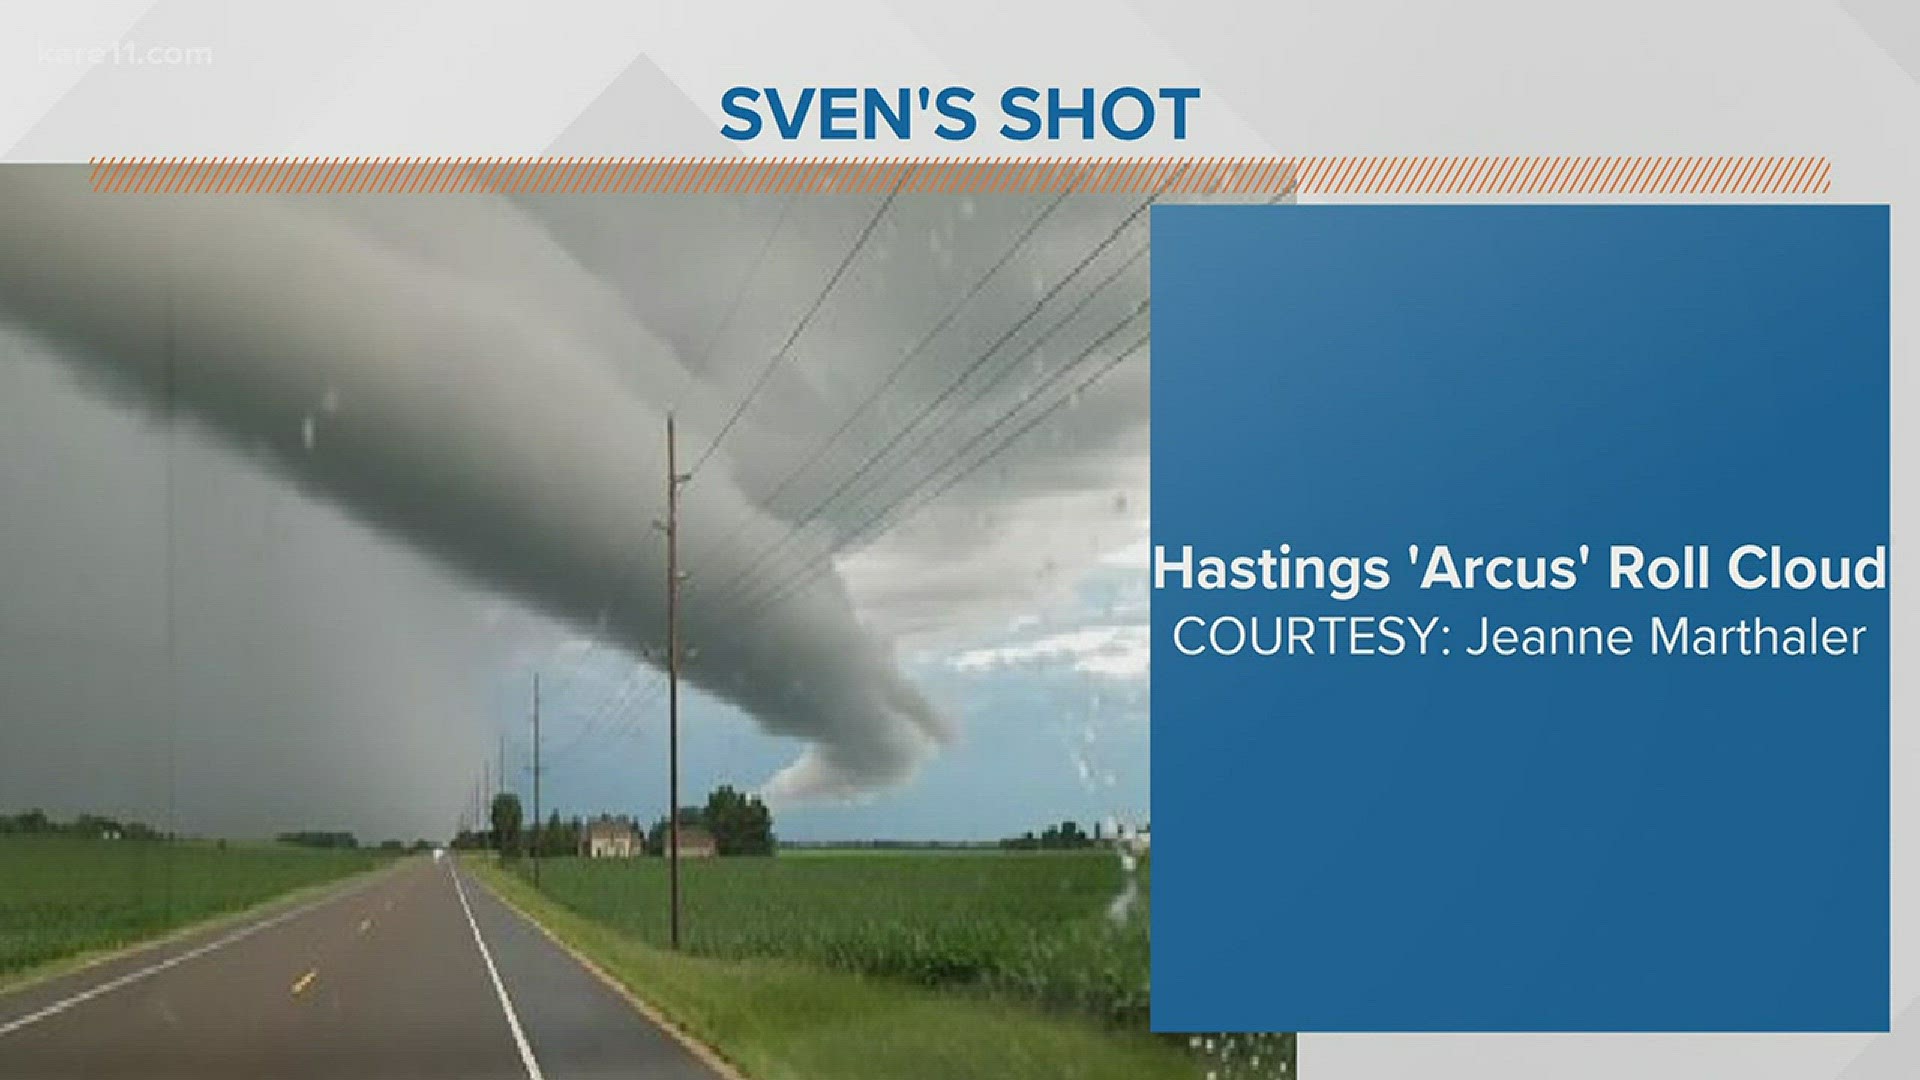 Thanks to Jeanne for sending this photo of an arcus roll cloud in Hastings over the weekend. http://kare11.tv/2iTedyz